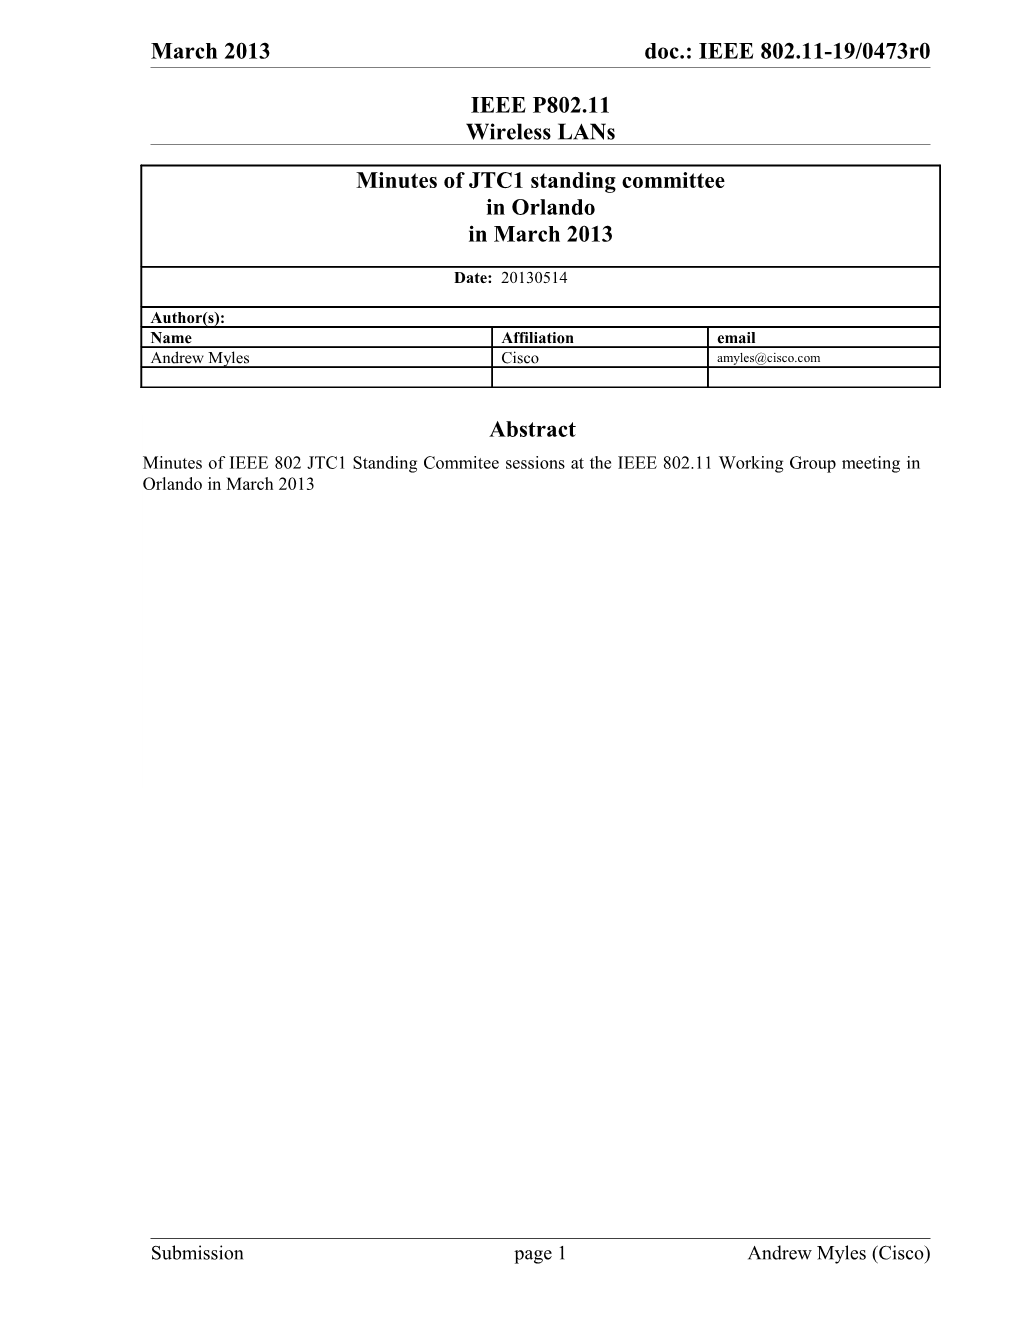 Minutes of JTC1 Ad Hoc Meeting Tue, Wed, Thu-PM1